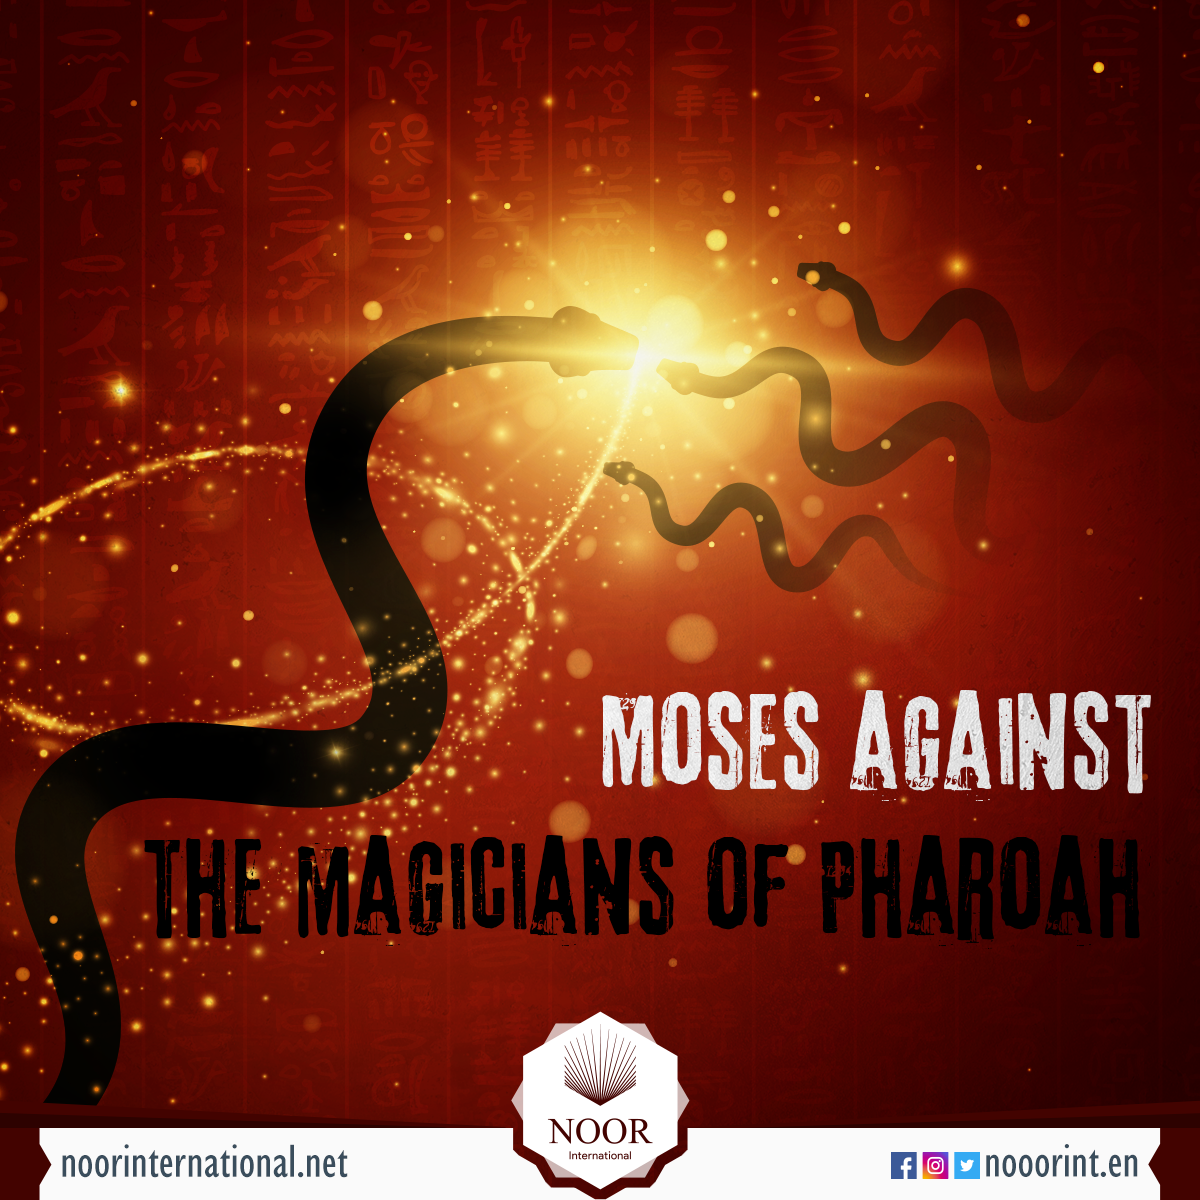 Moses in the Holy Quran